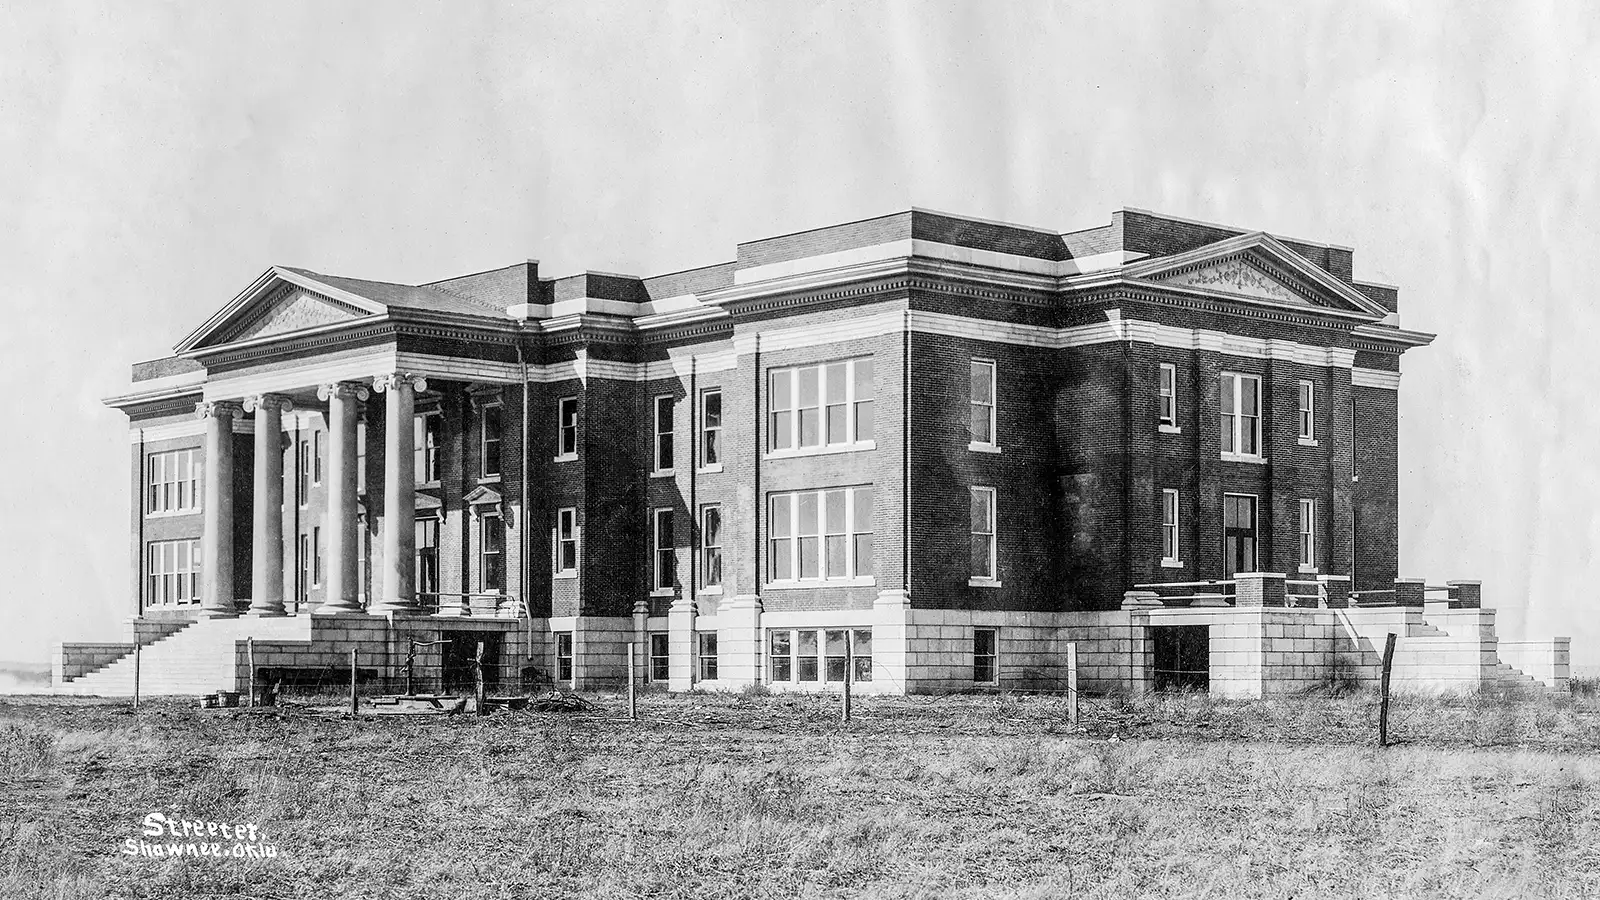 A photograph of Shawnee Hall from 1915